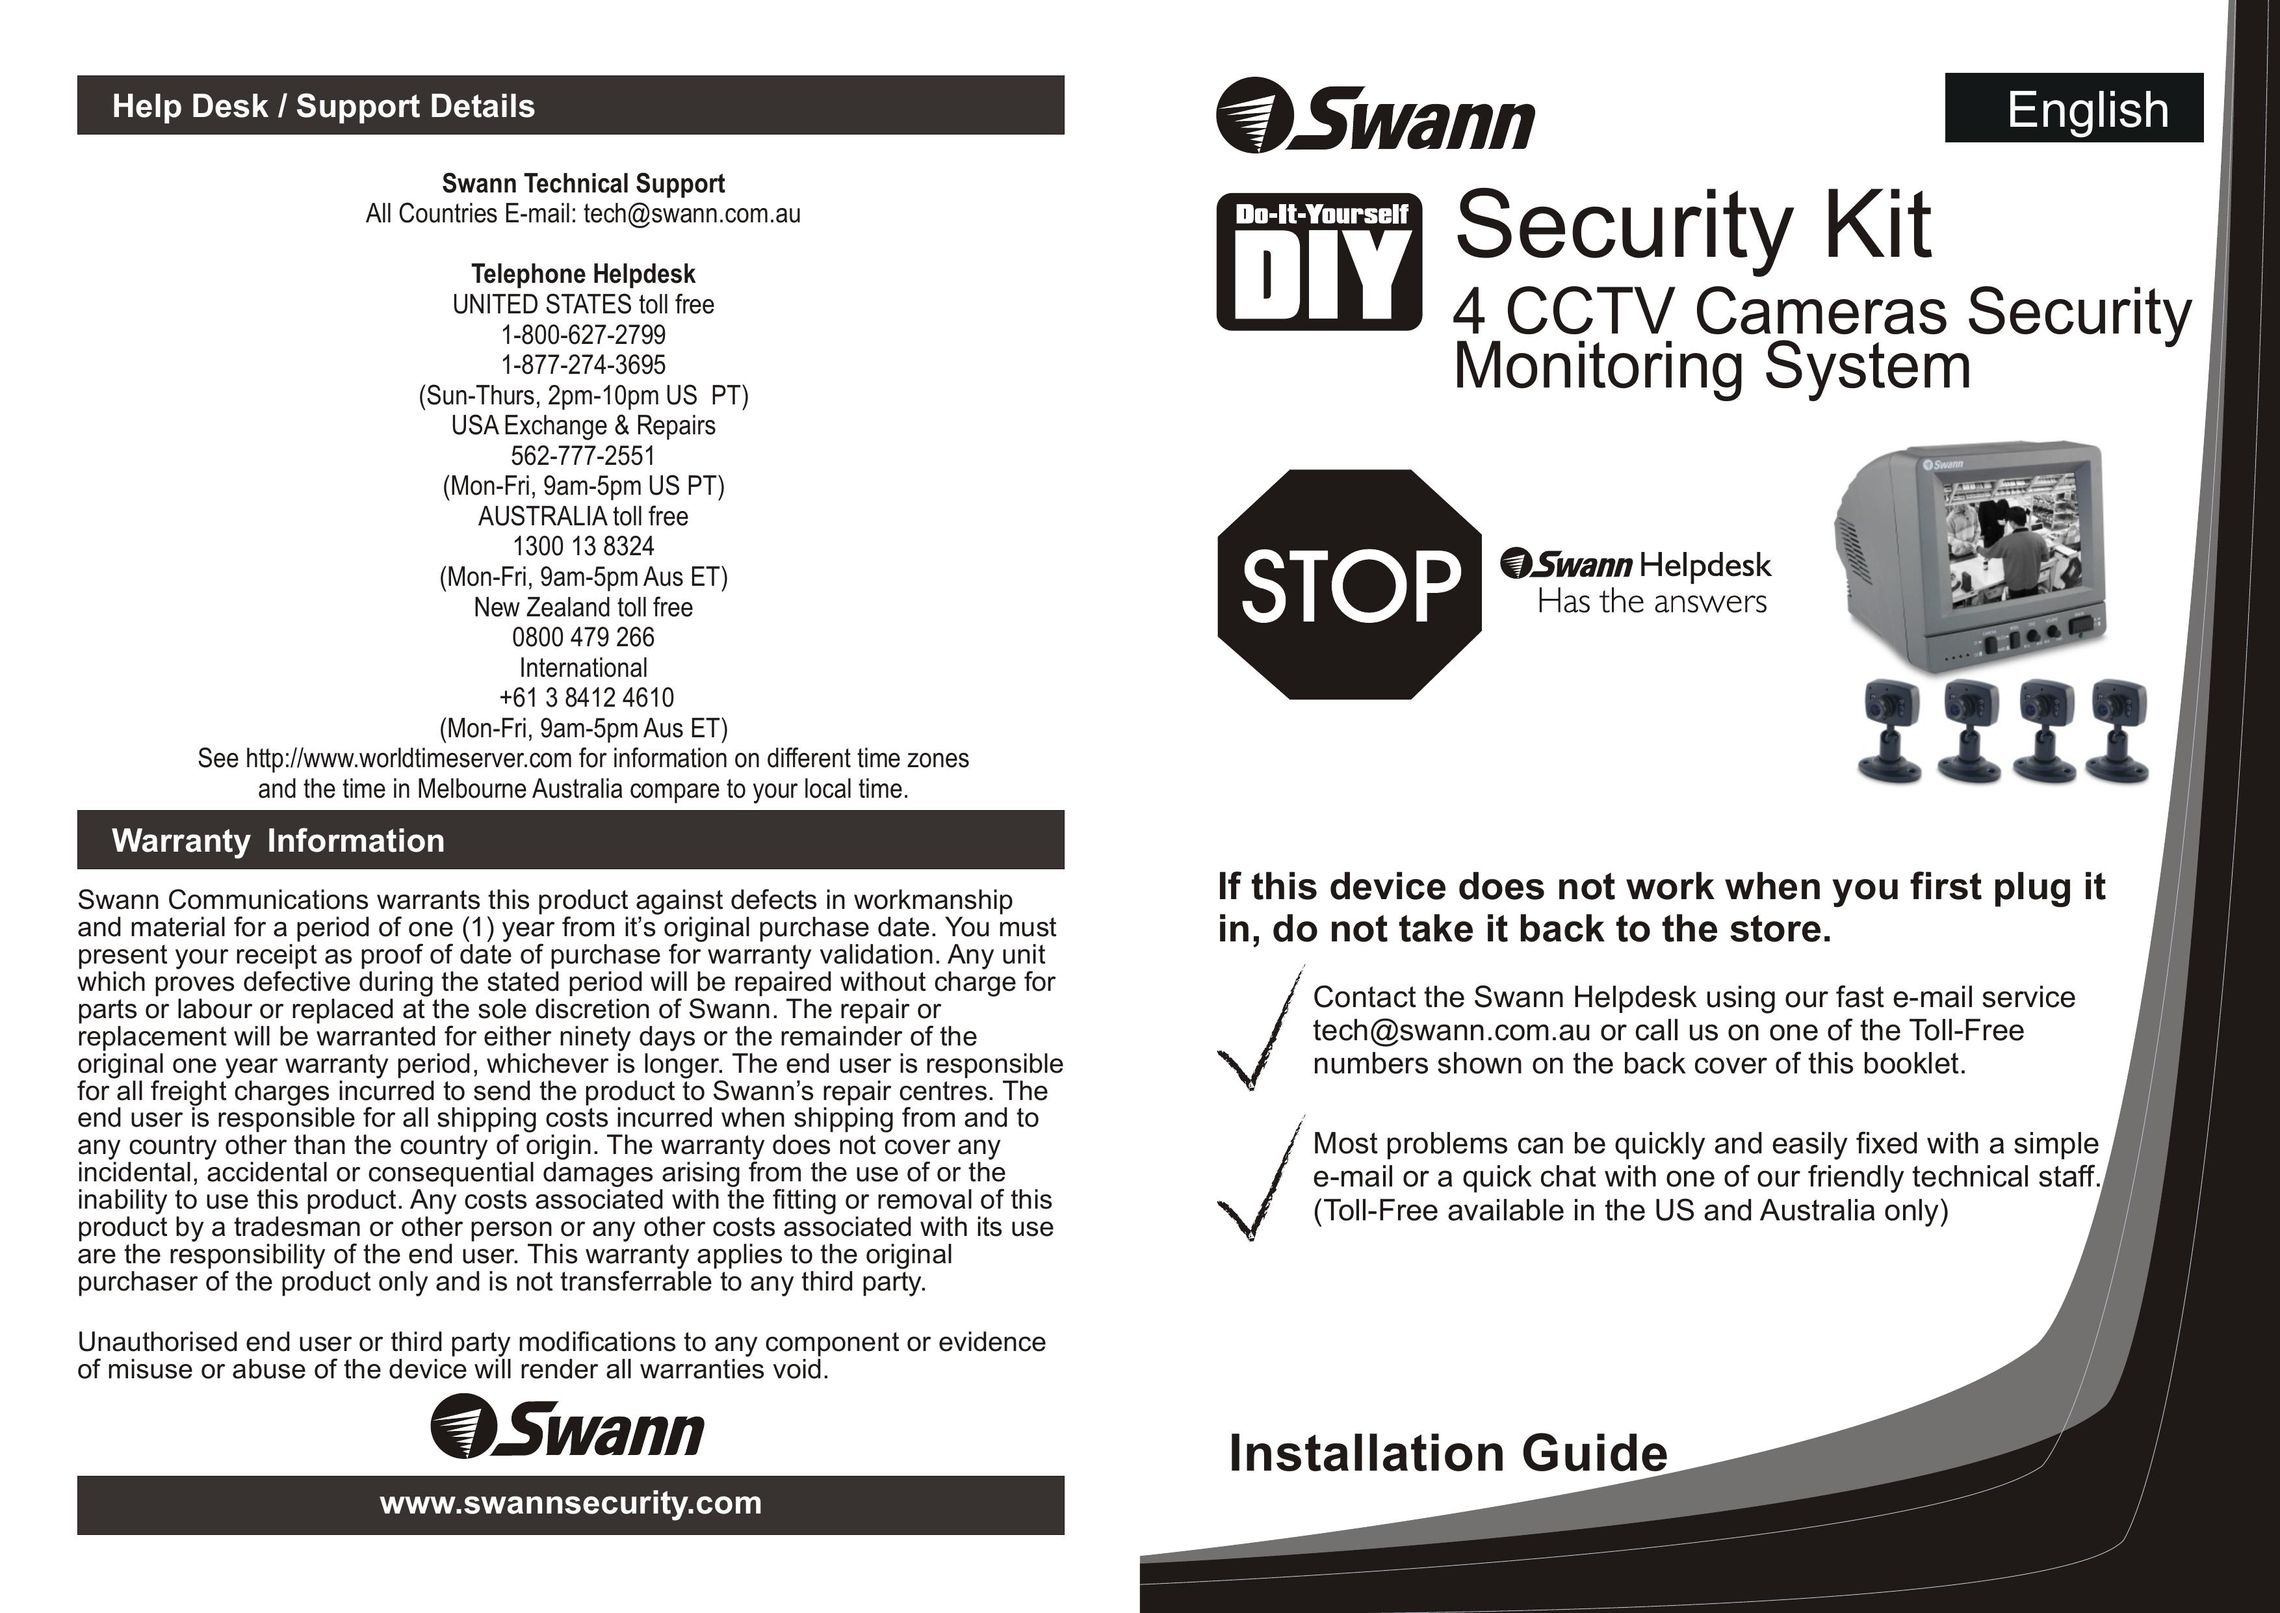 Swann 4 CCTV Cameras Security Monitoring System Home Security System User Manual